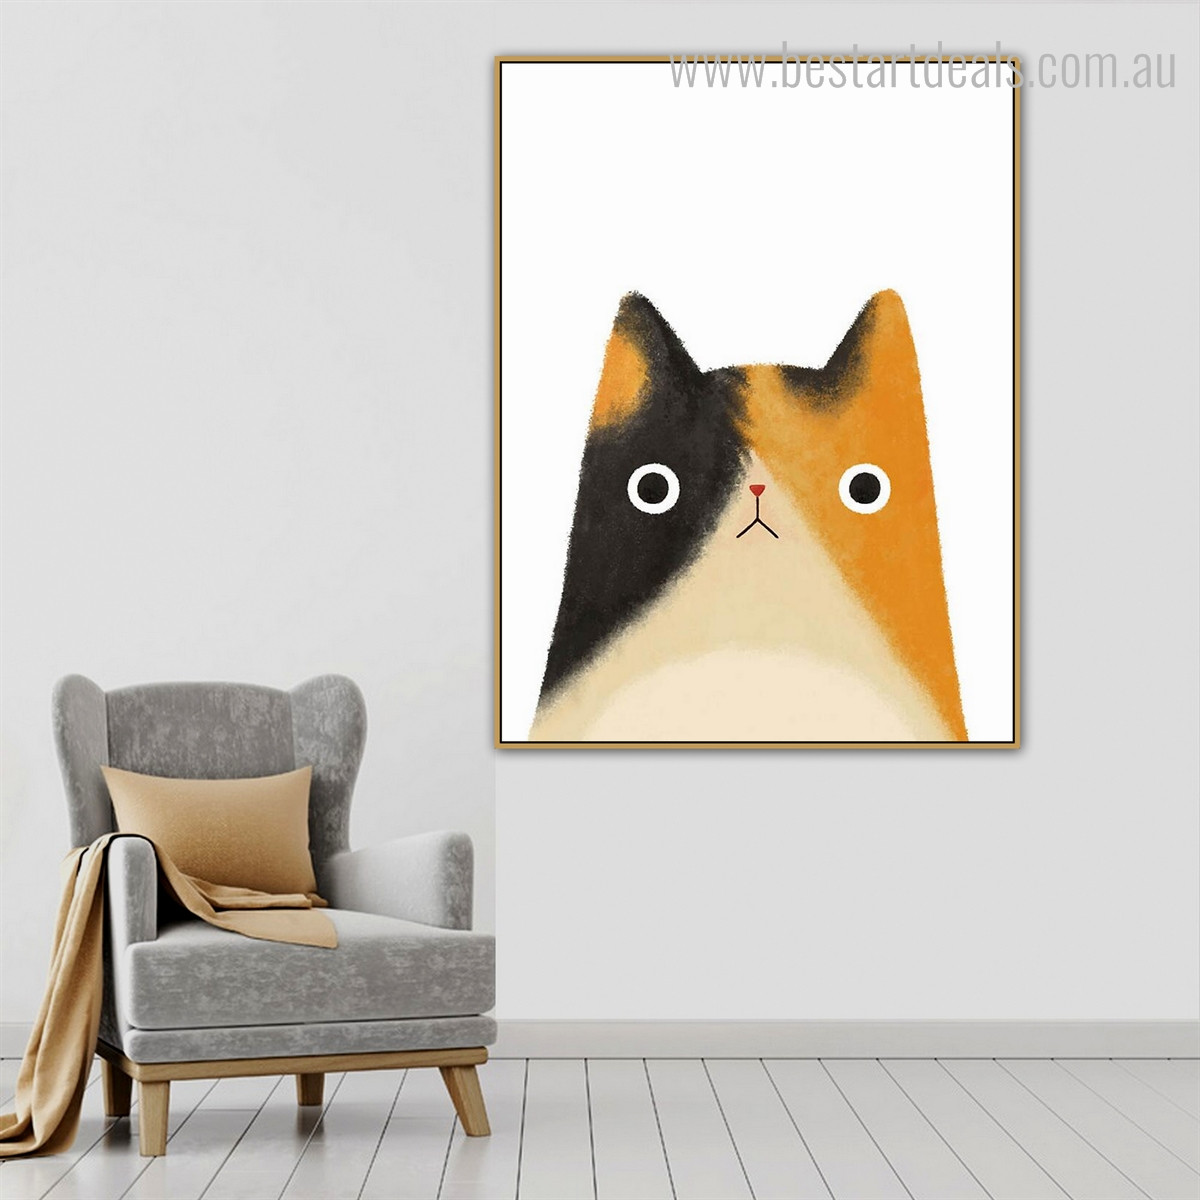 Kitty Abstract Animal Modern Framed Likeness Portrait Canvas Print for Room Wall Outfit